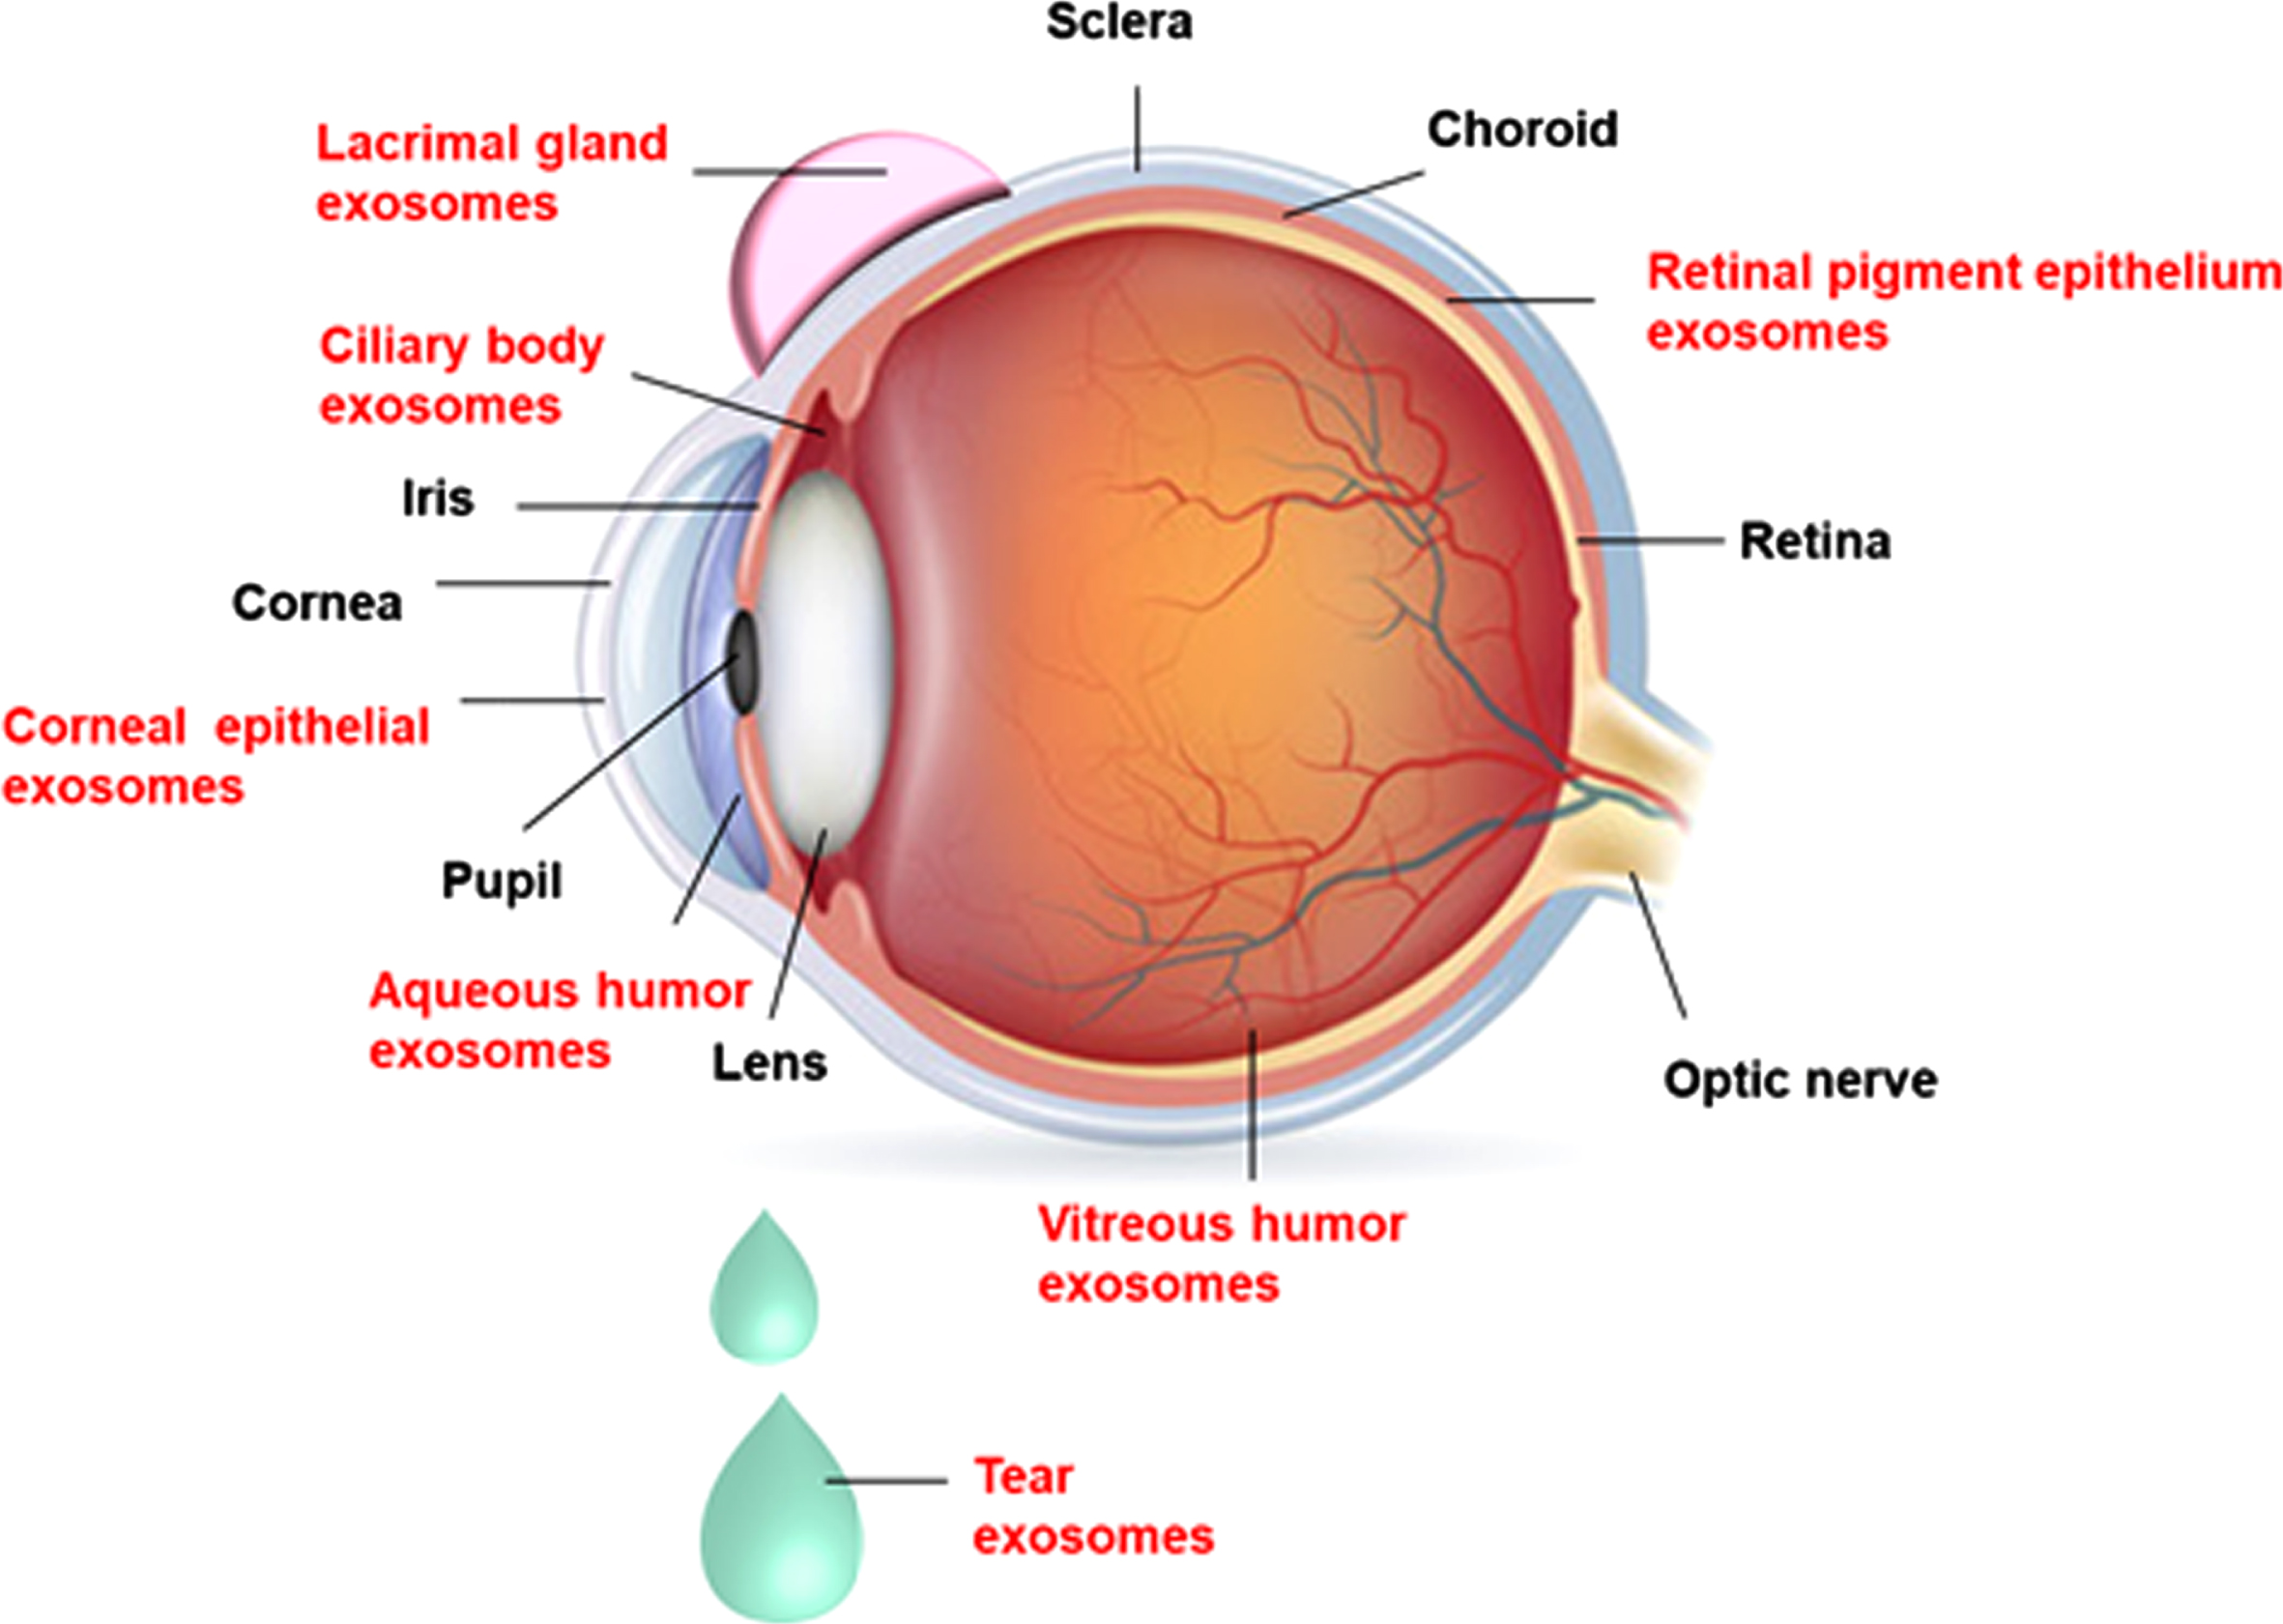 The presence of exosomes in different ocular tissues: Exosomes are present in the ocular tissues such as cornea (corneal epithelial cells), ciliary body, lacrimal gland, retina (retinal pigment epithelial cells), trabecular meshwork, and ocular fluids like aqueous humor, vitreous humor, and tears.